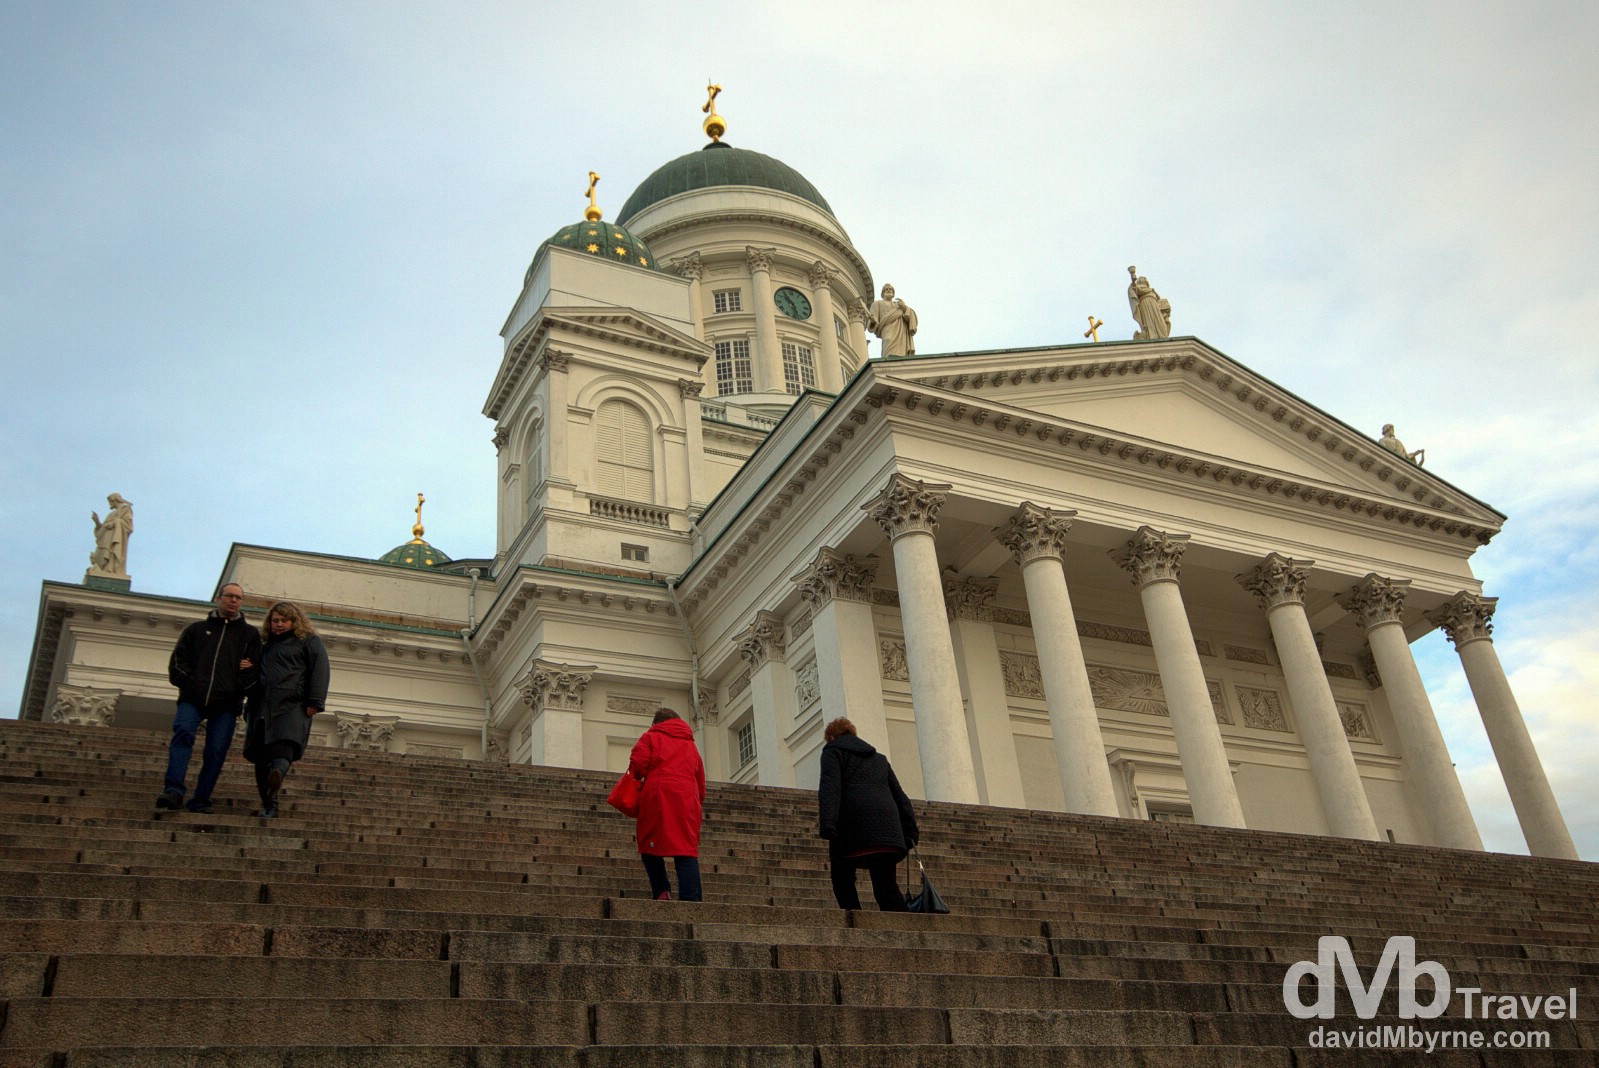 People on the steps to Helsinki Cathedral in (Senaatintori) Senate Square, Helsinki, Finland. November 24th 2012.